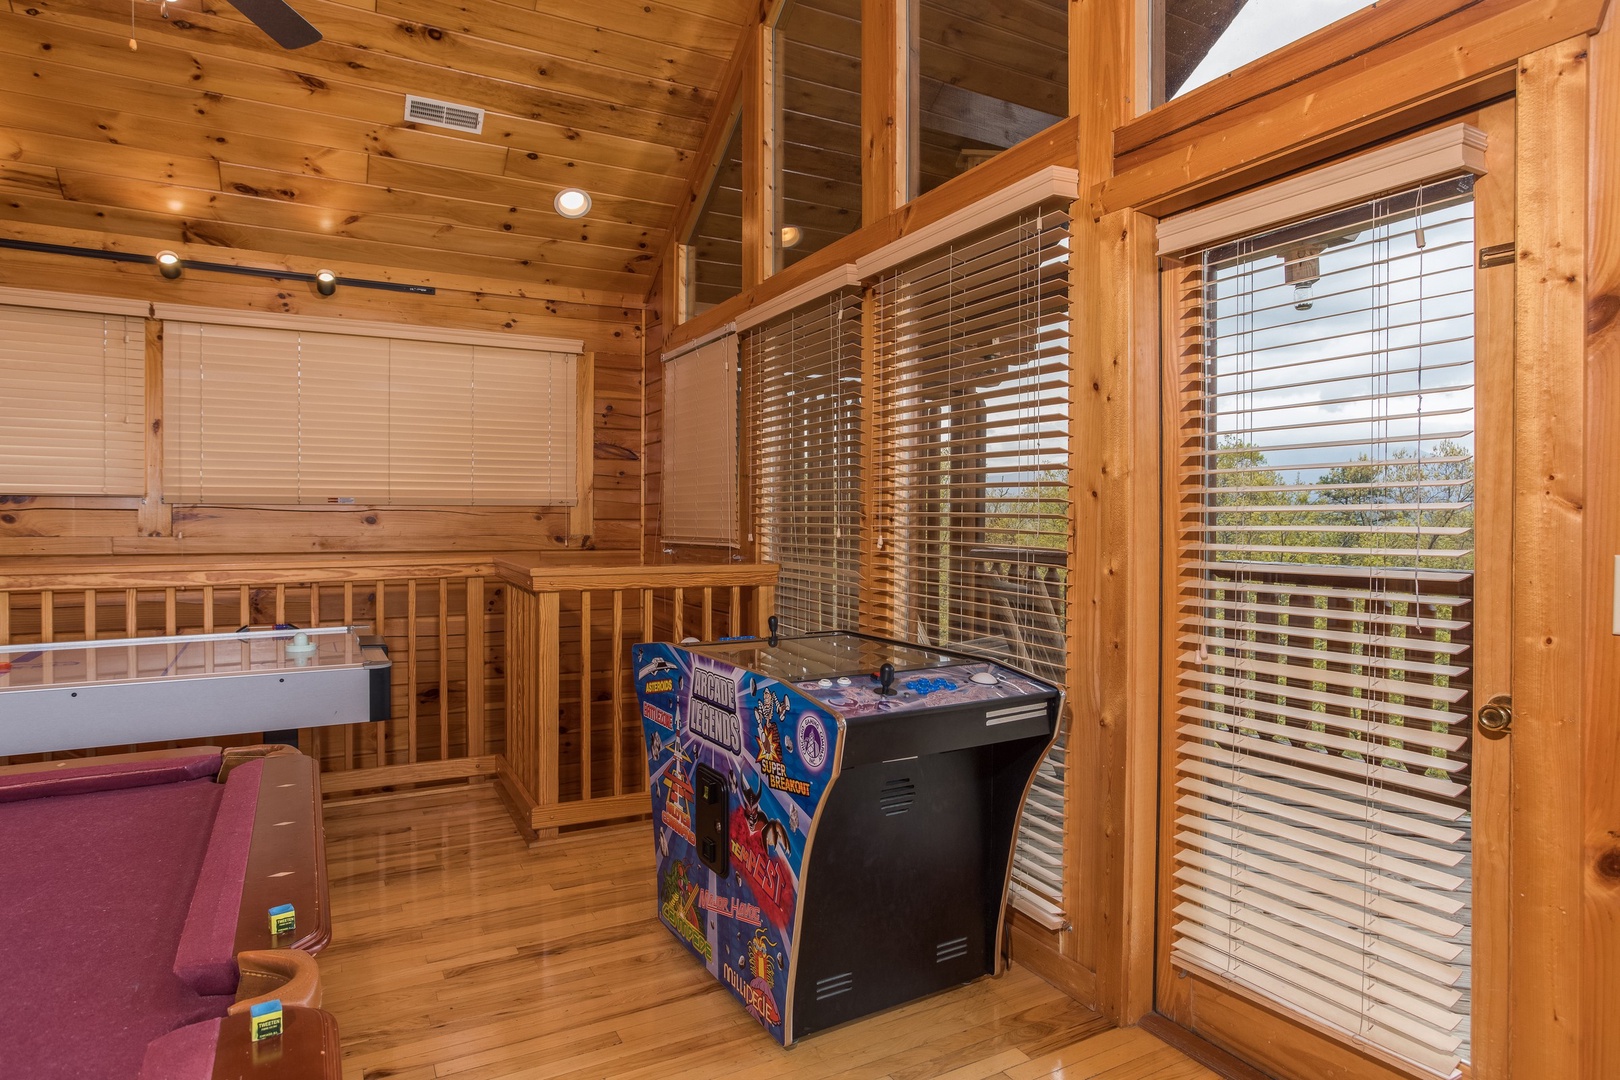 Multicade game at Howlin' in the Smokies, a 2 bedroom cabin rental located in Pigeon Forge